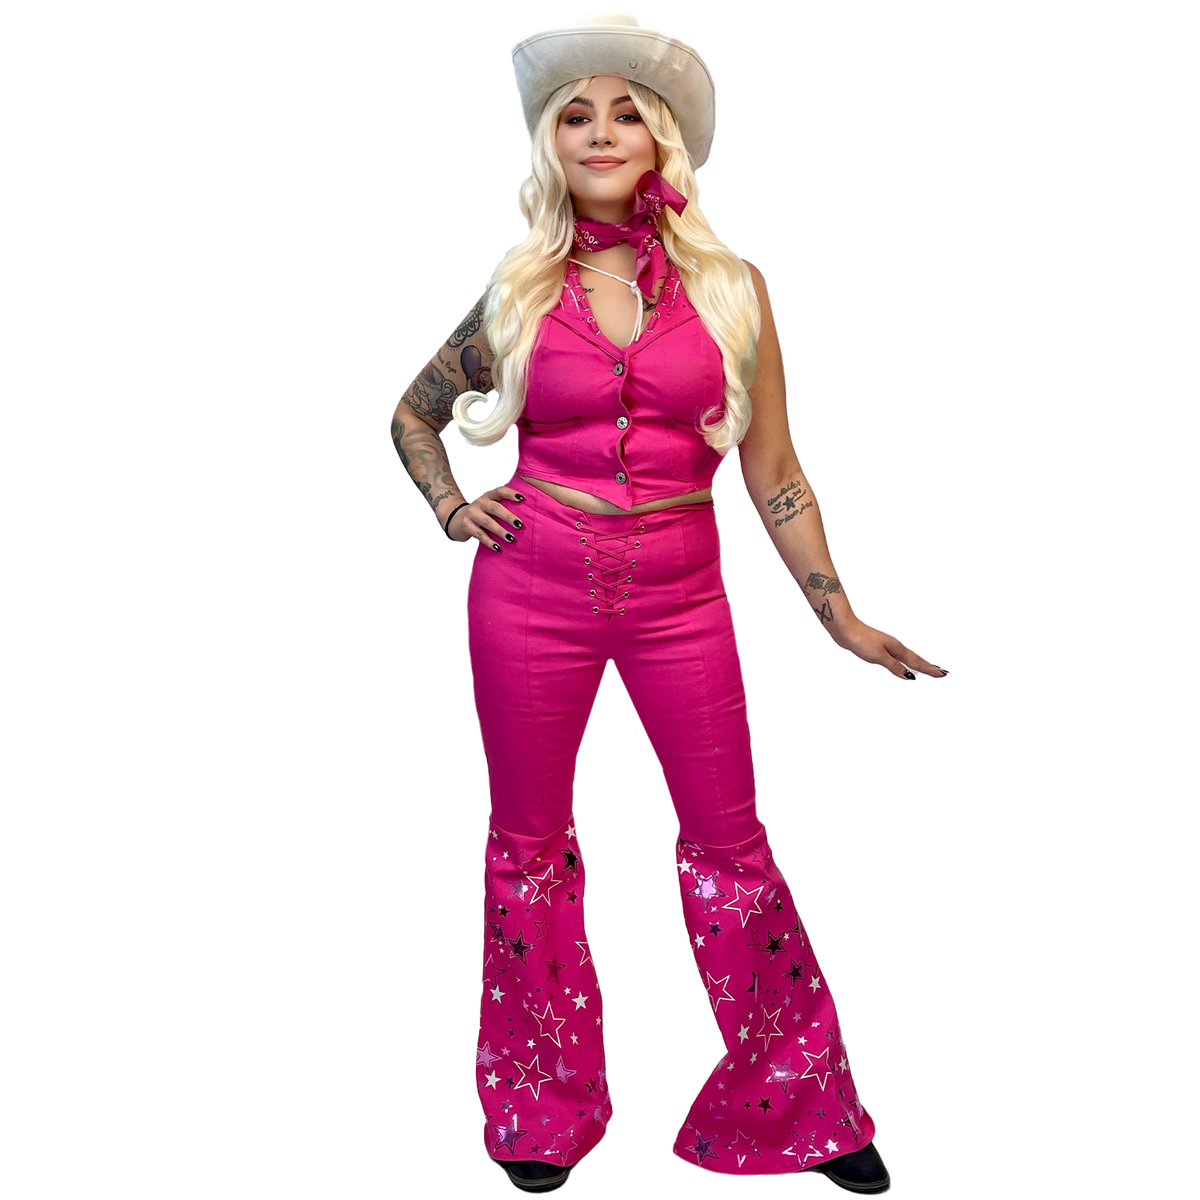 Barb Doll Movie Margot Elise Robbie Cowgirl Cosplay Adult Costume